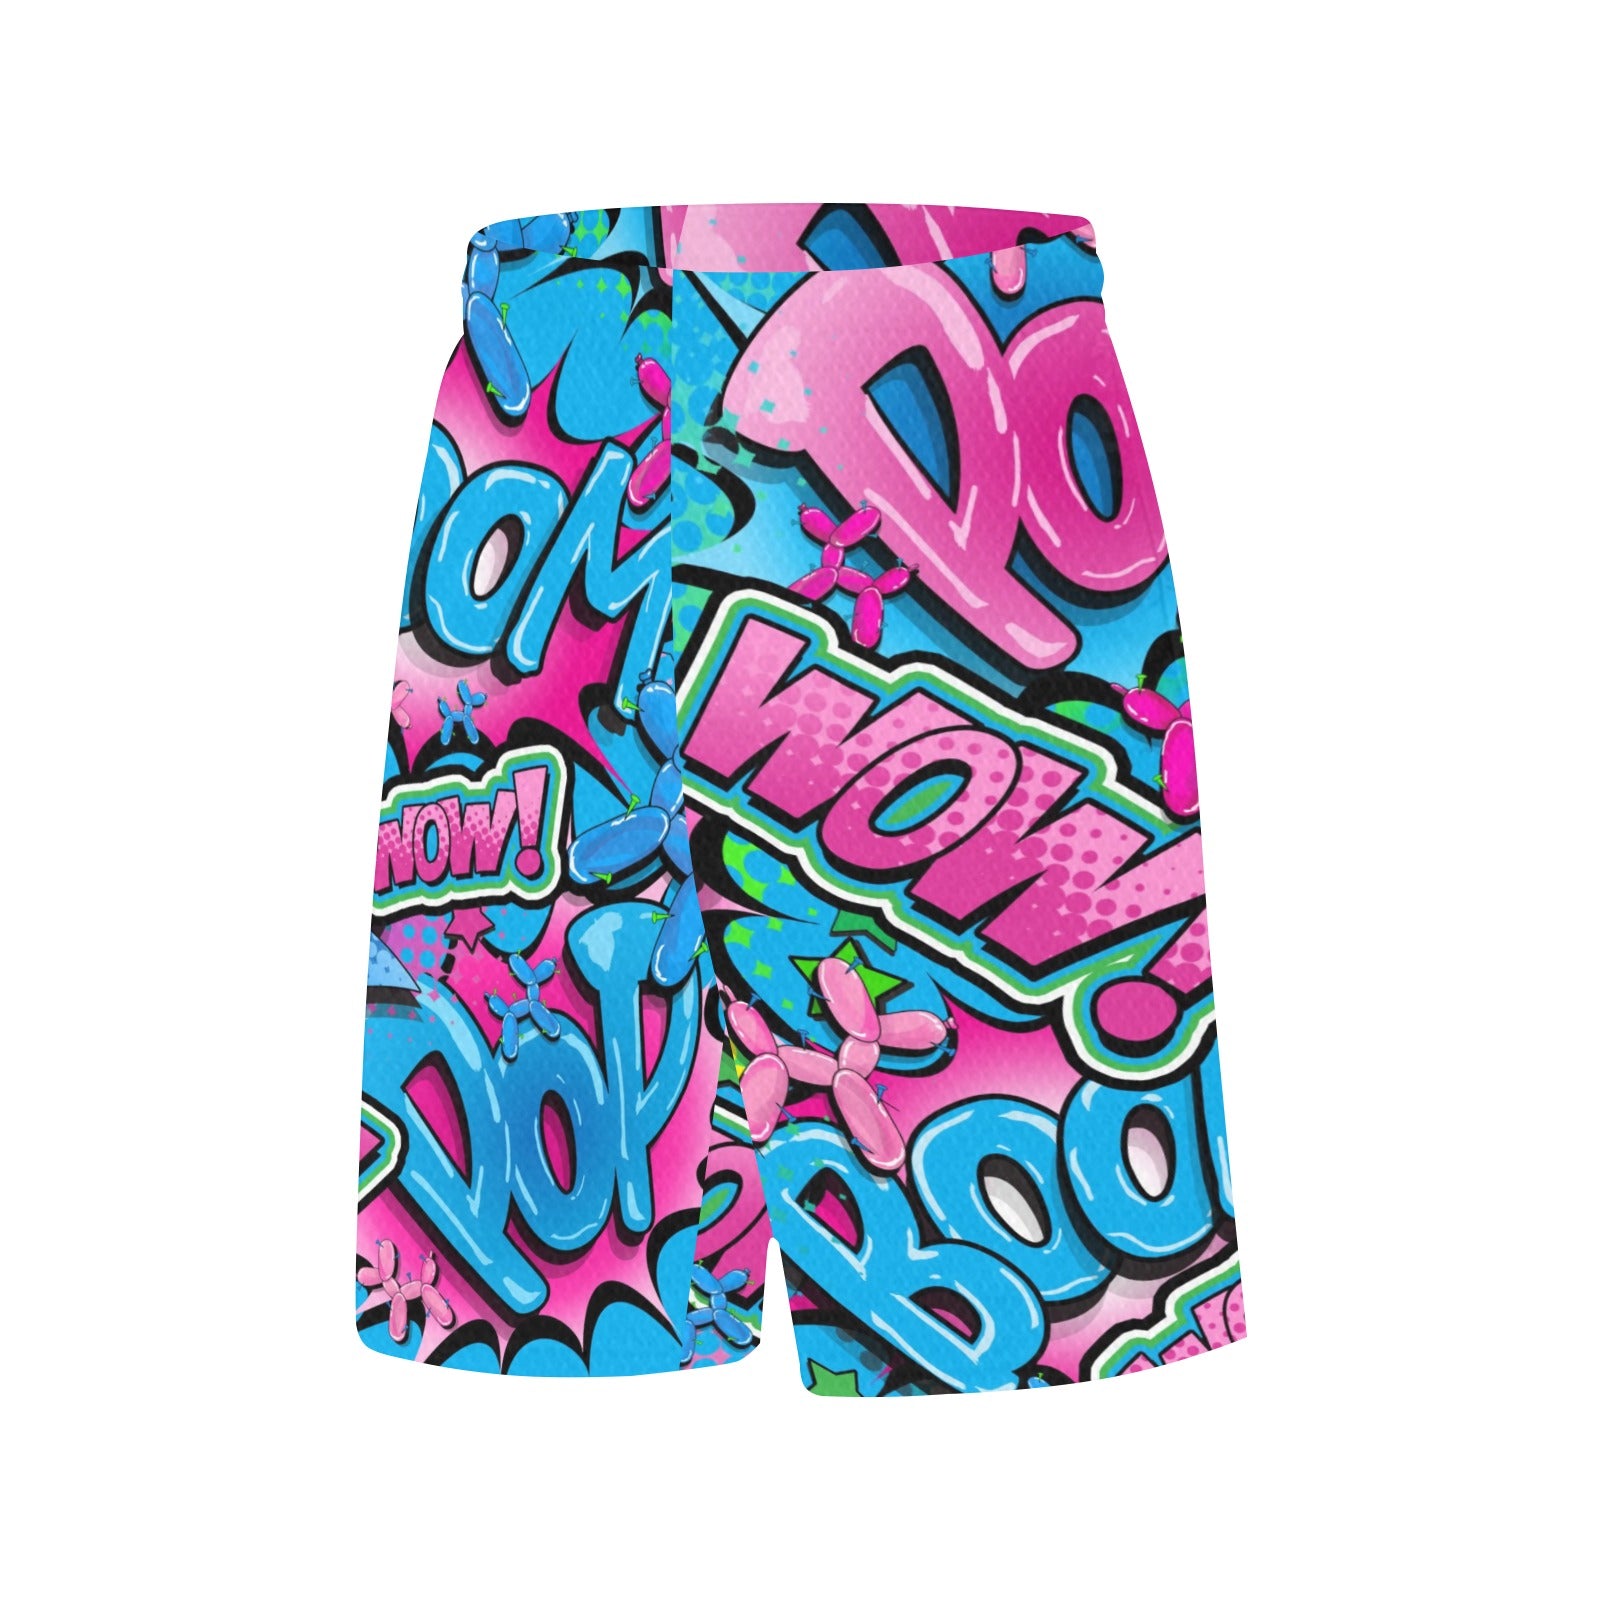 Basketball shorts for balloon twisters pink and blue pop art balloon dog design